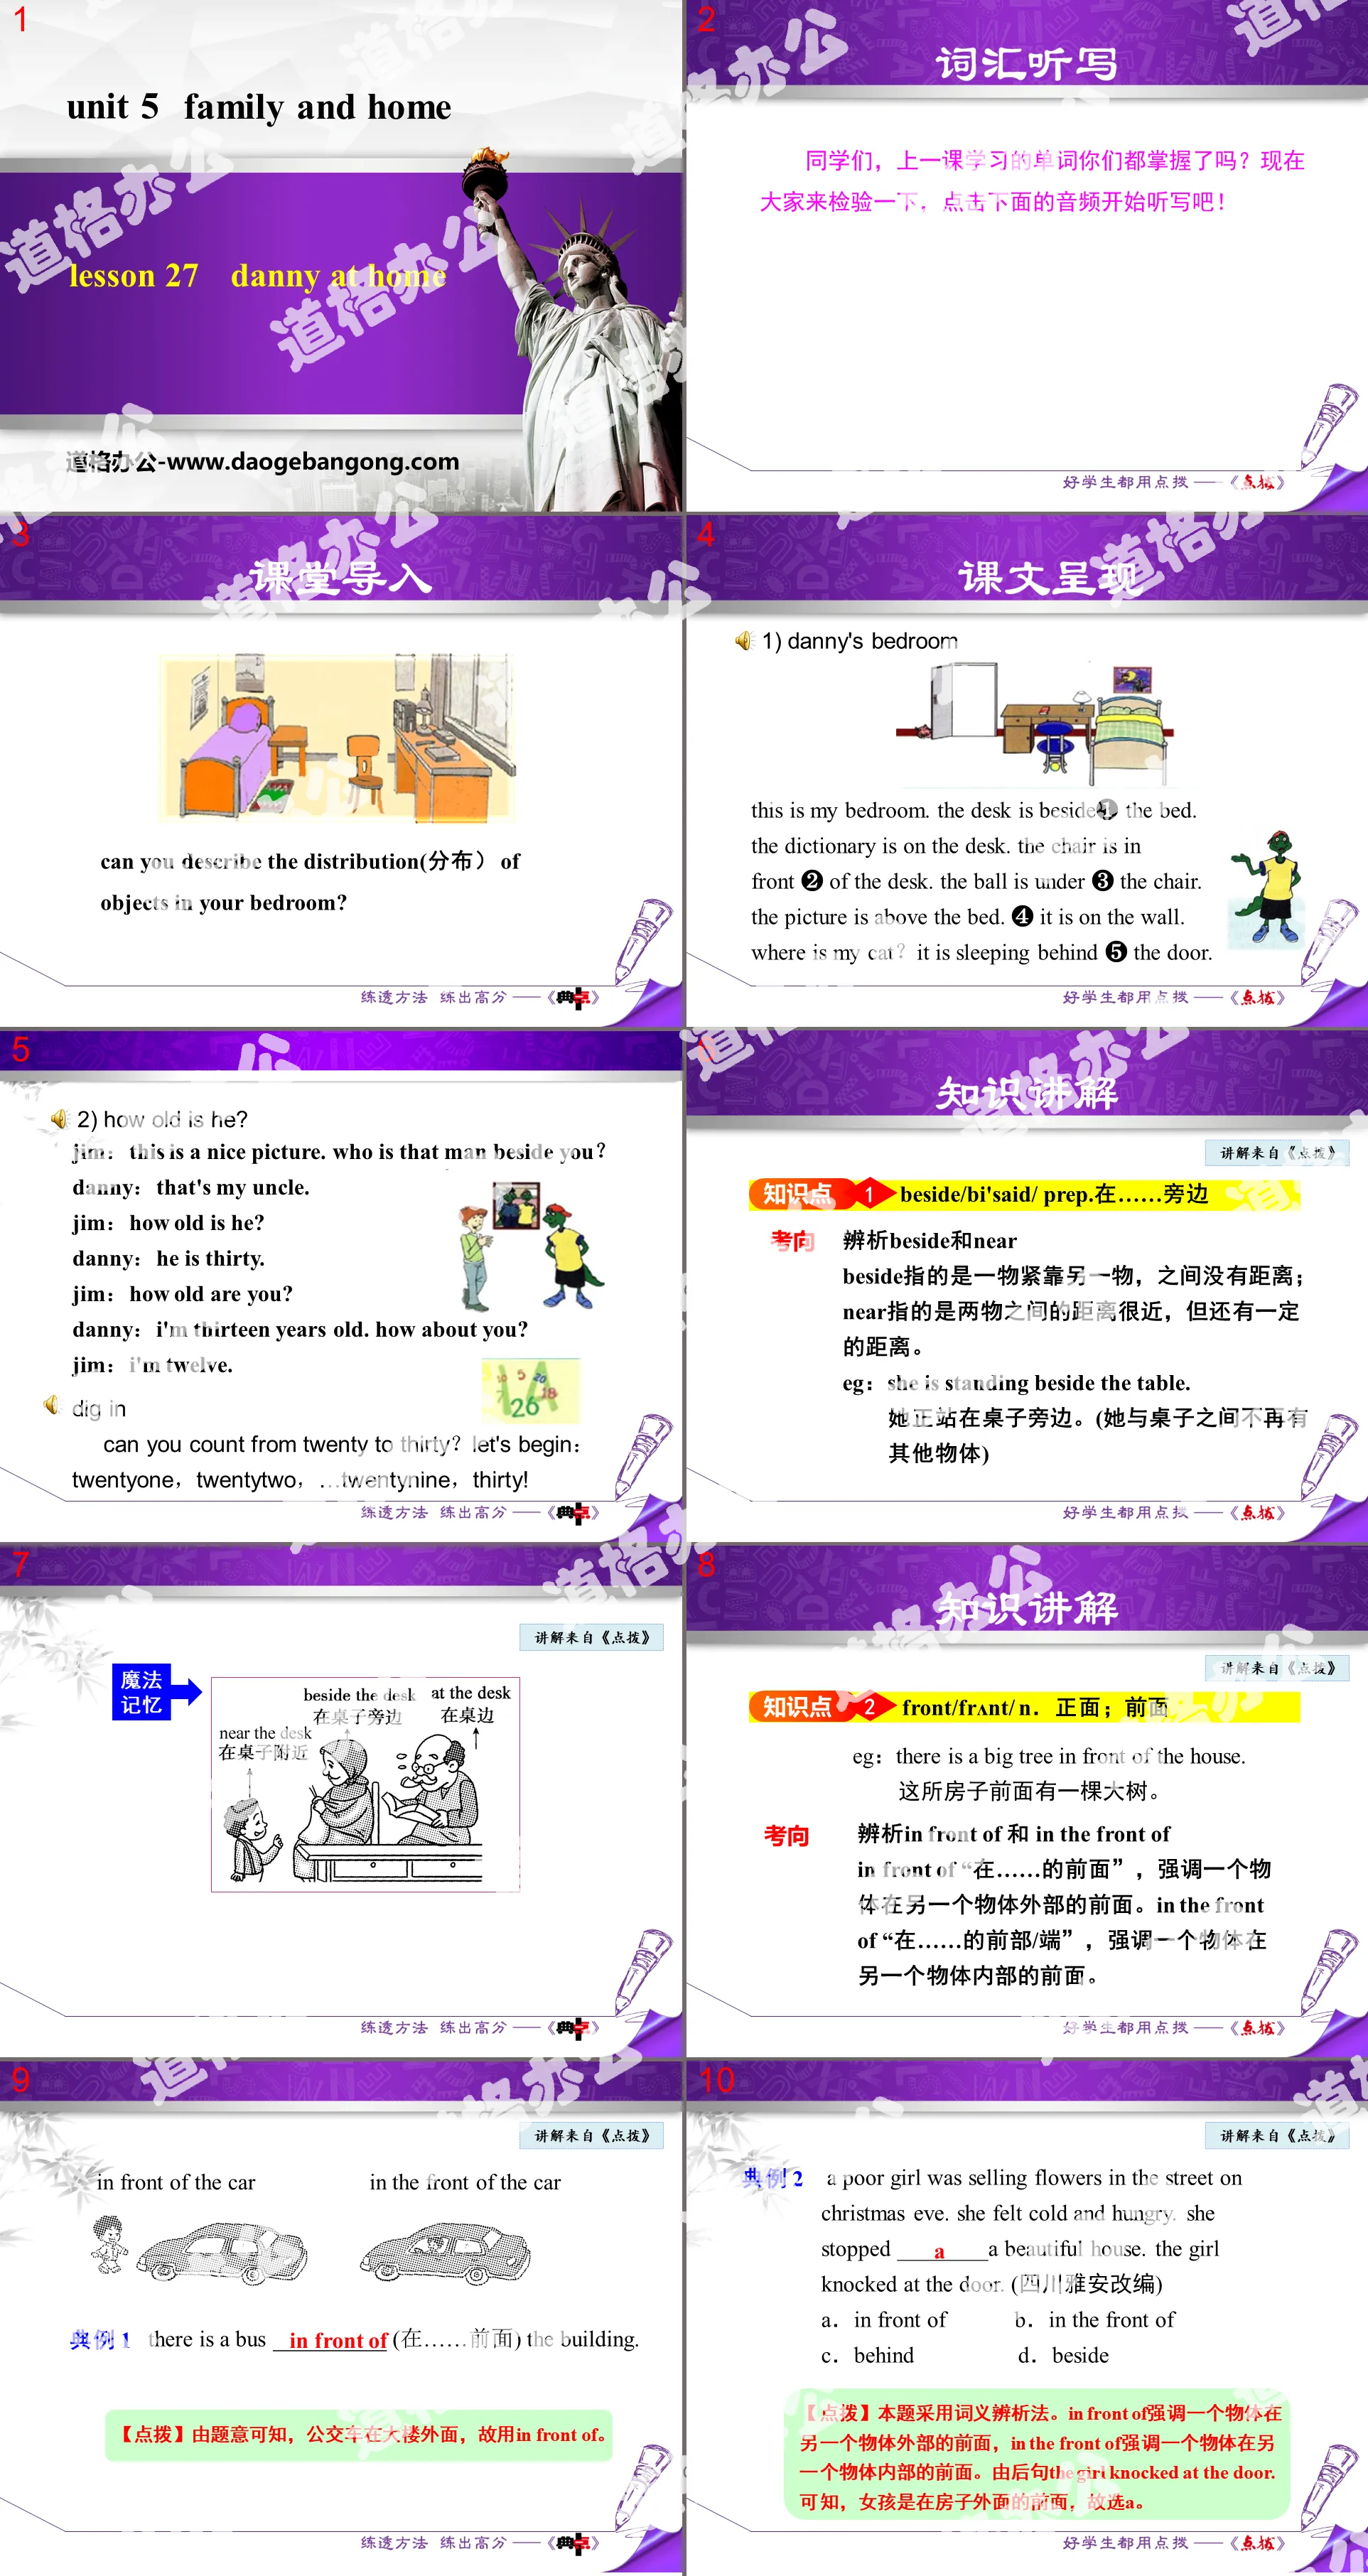 《Danny at Home》Family and Home PPT教学课件
